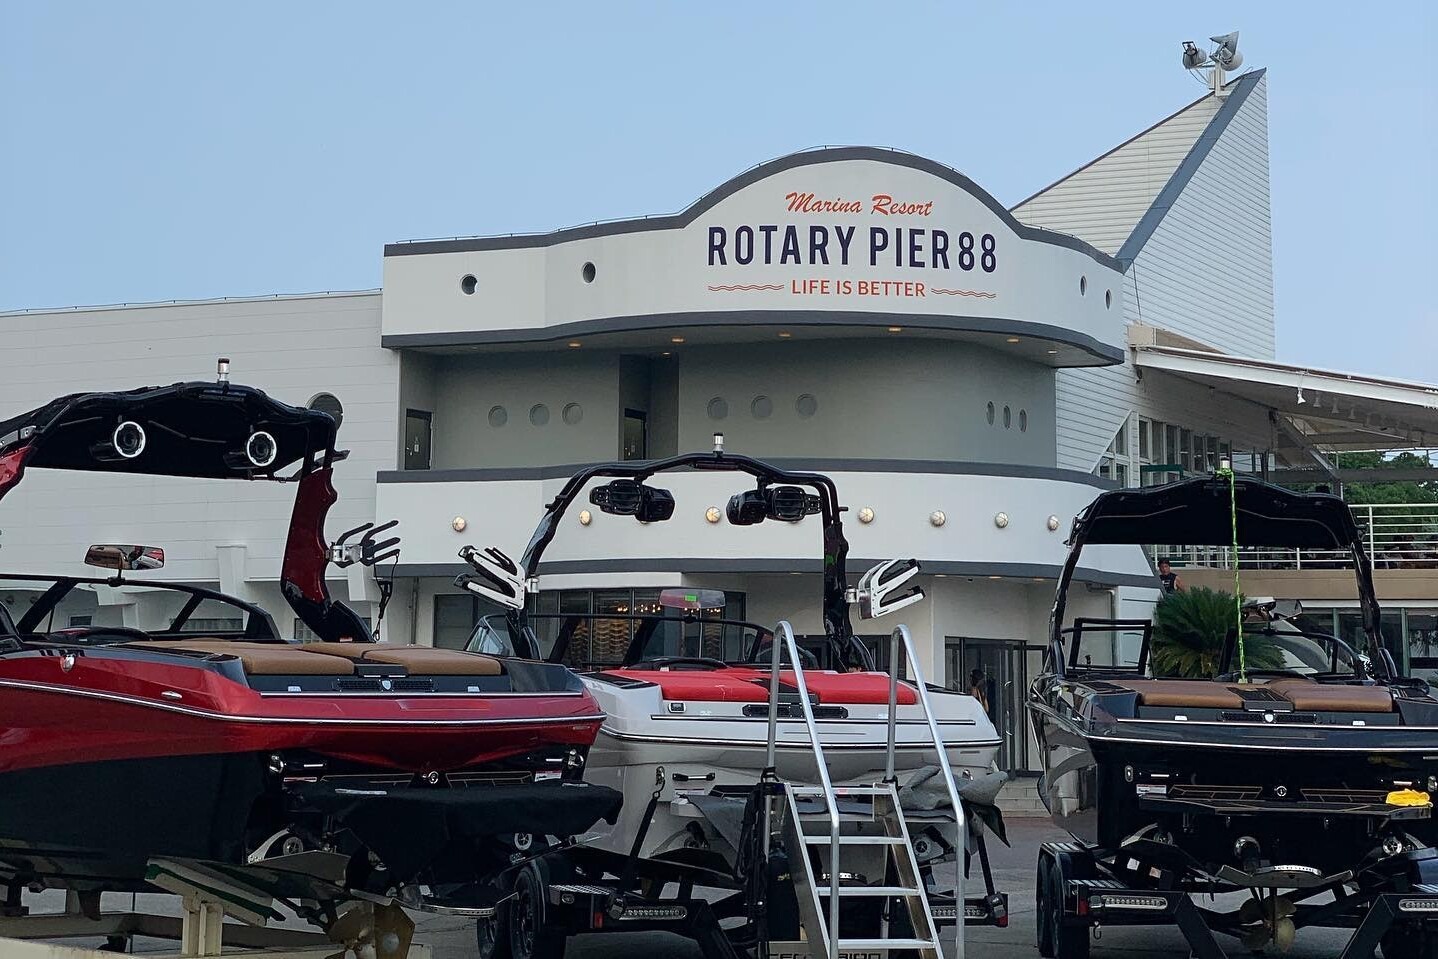 Several boats are docked in front of Rotary Pier 88 at Marina Resort, with a sign that reads 